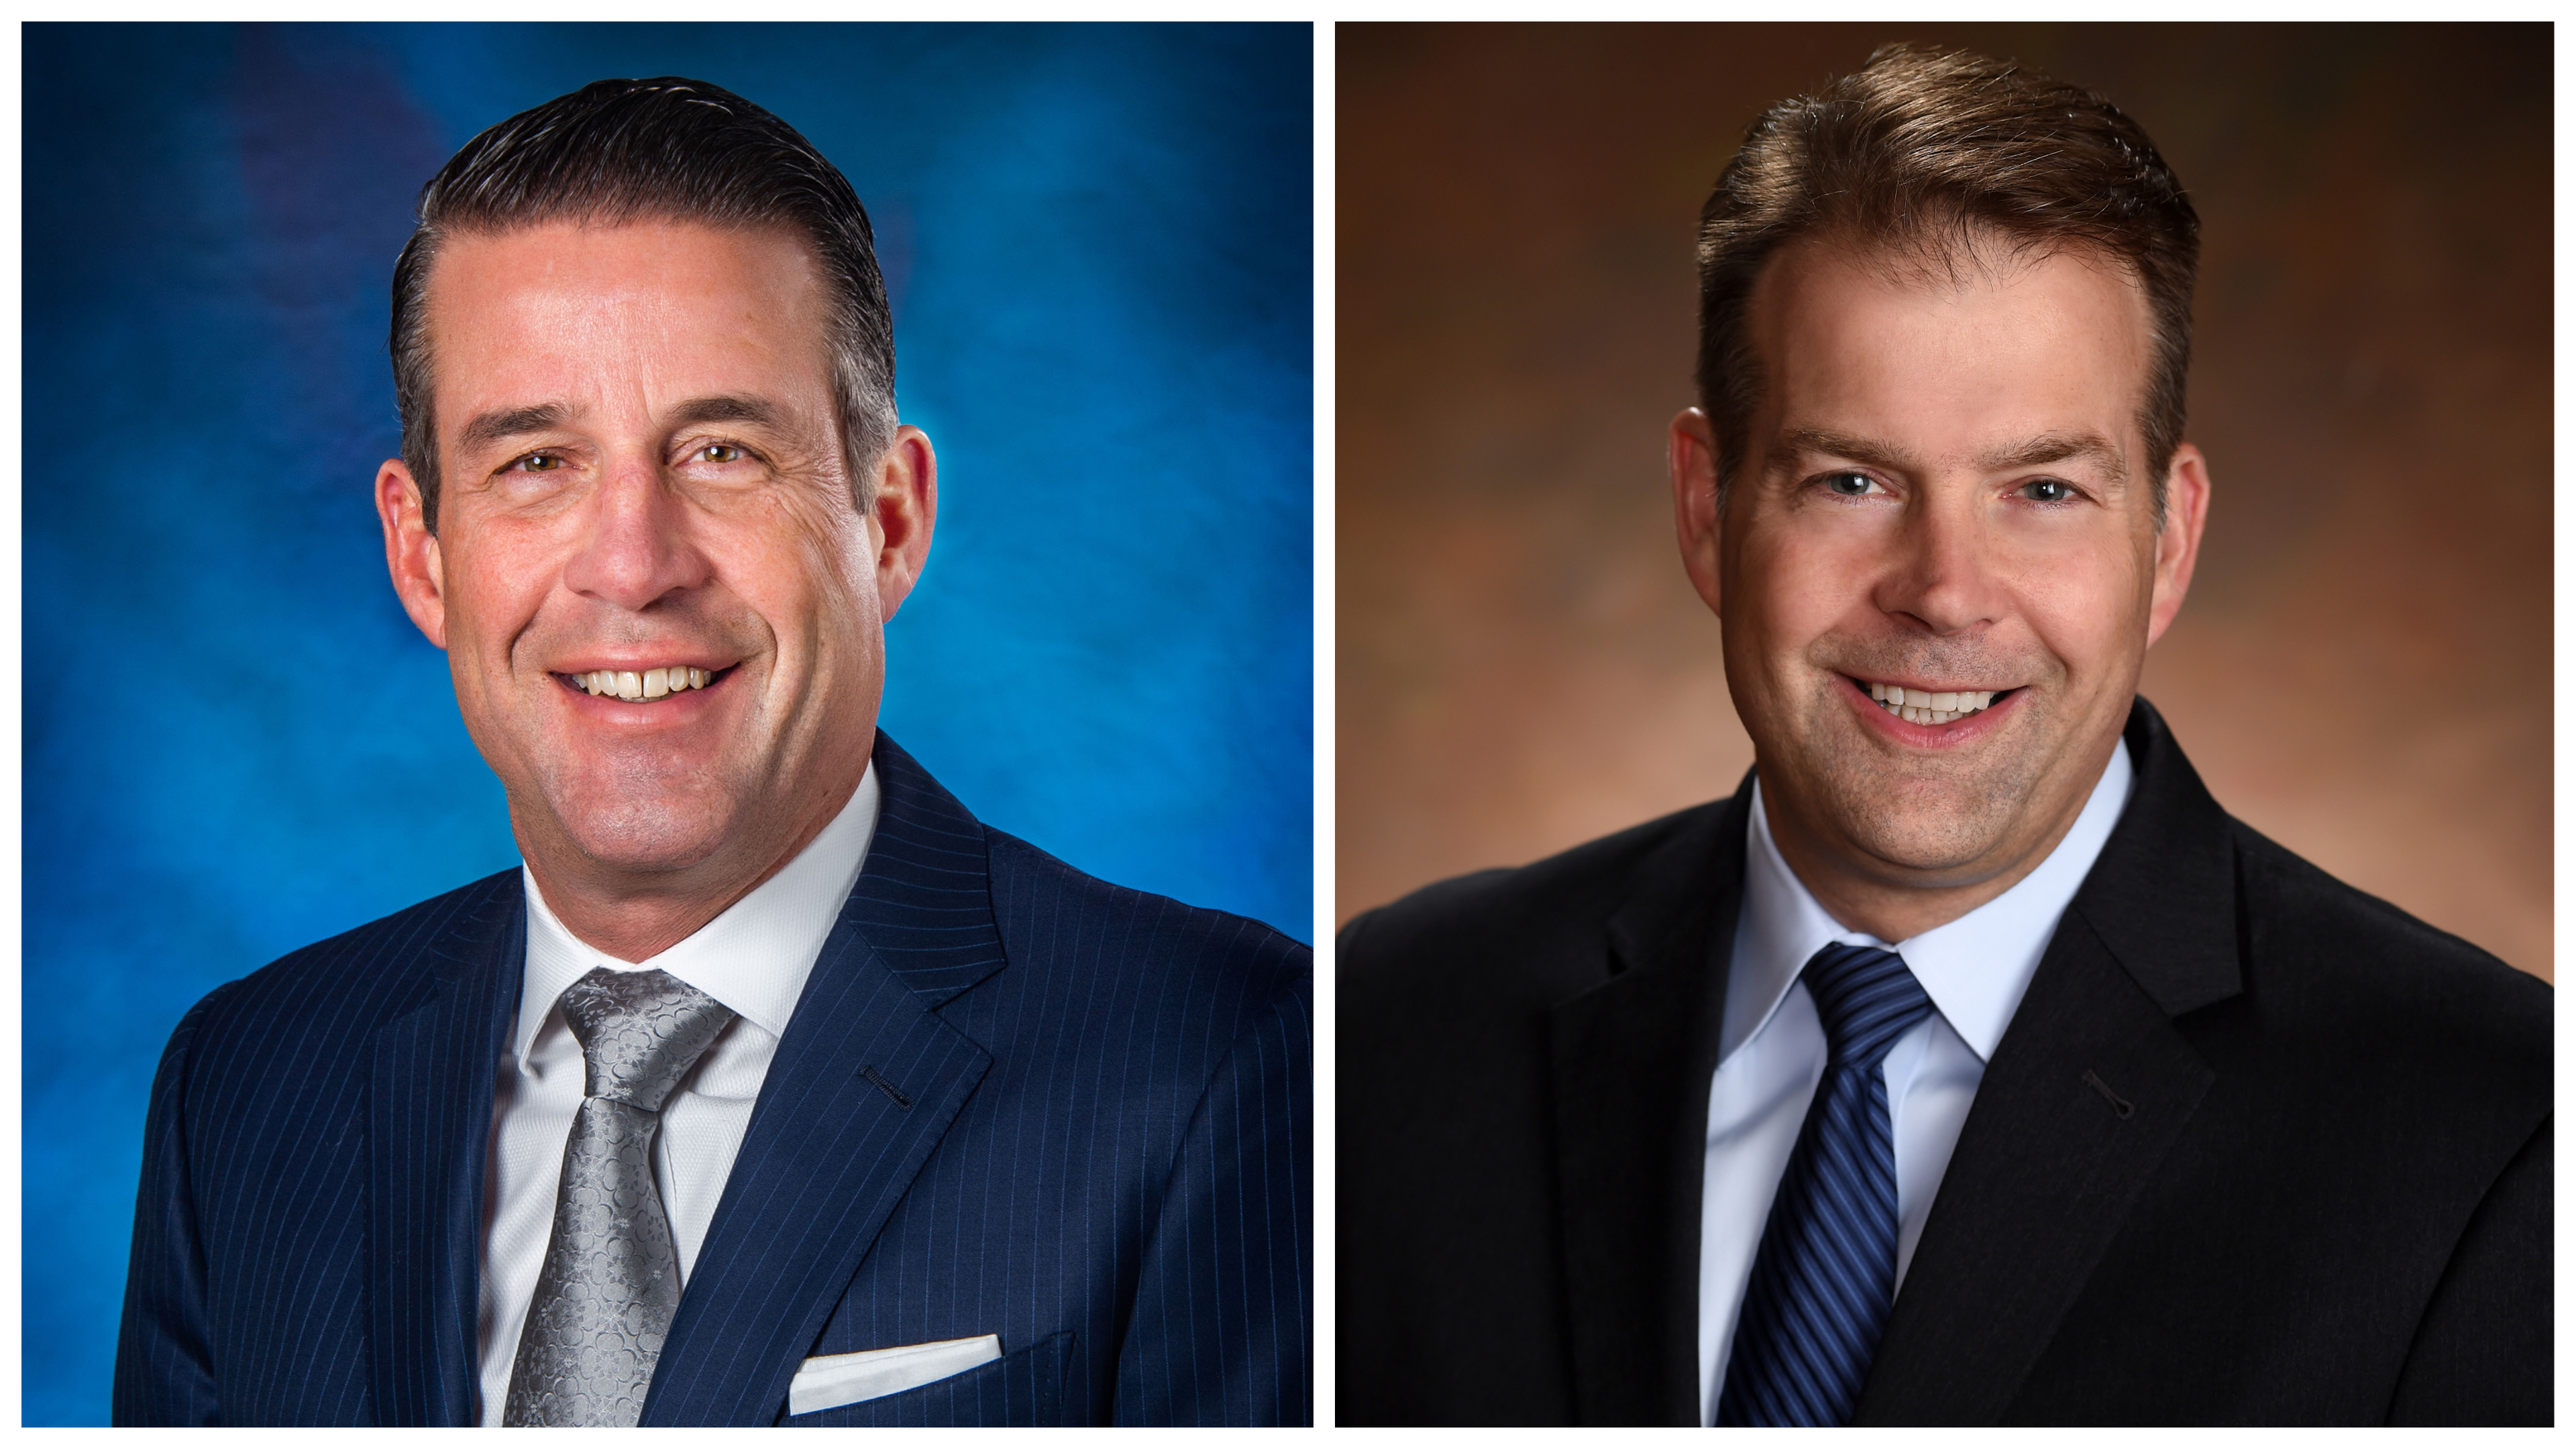 John Arnold and Kevin DeAcosta join the Alvernia University Board of Trustees